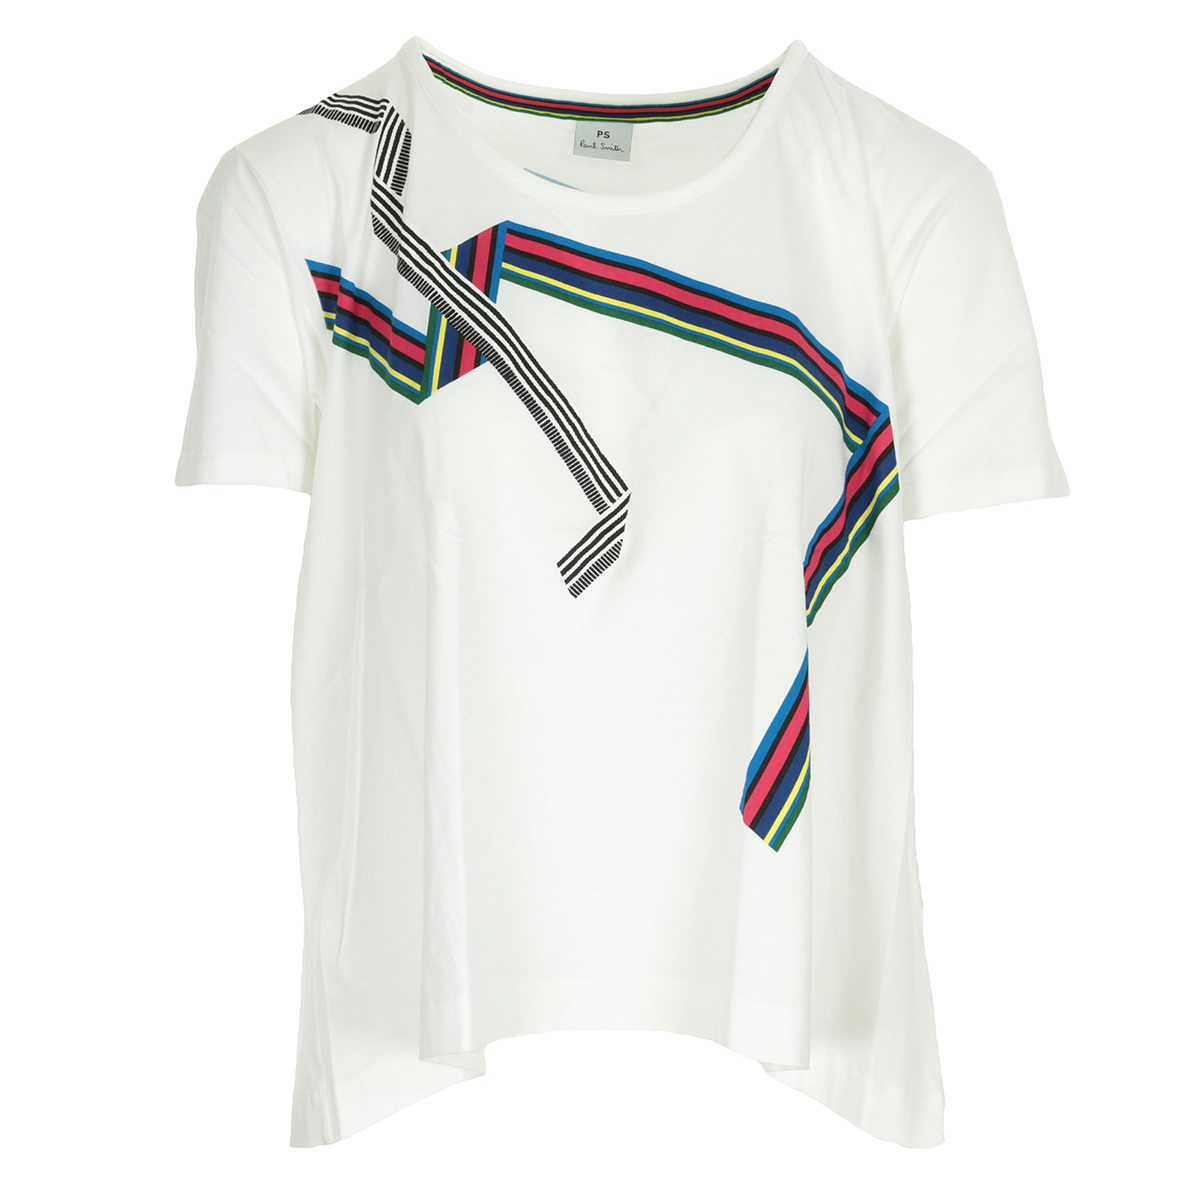 PS by Paul Smith Tee Shirt Femme Printed